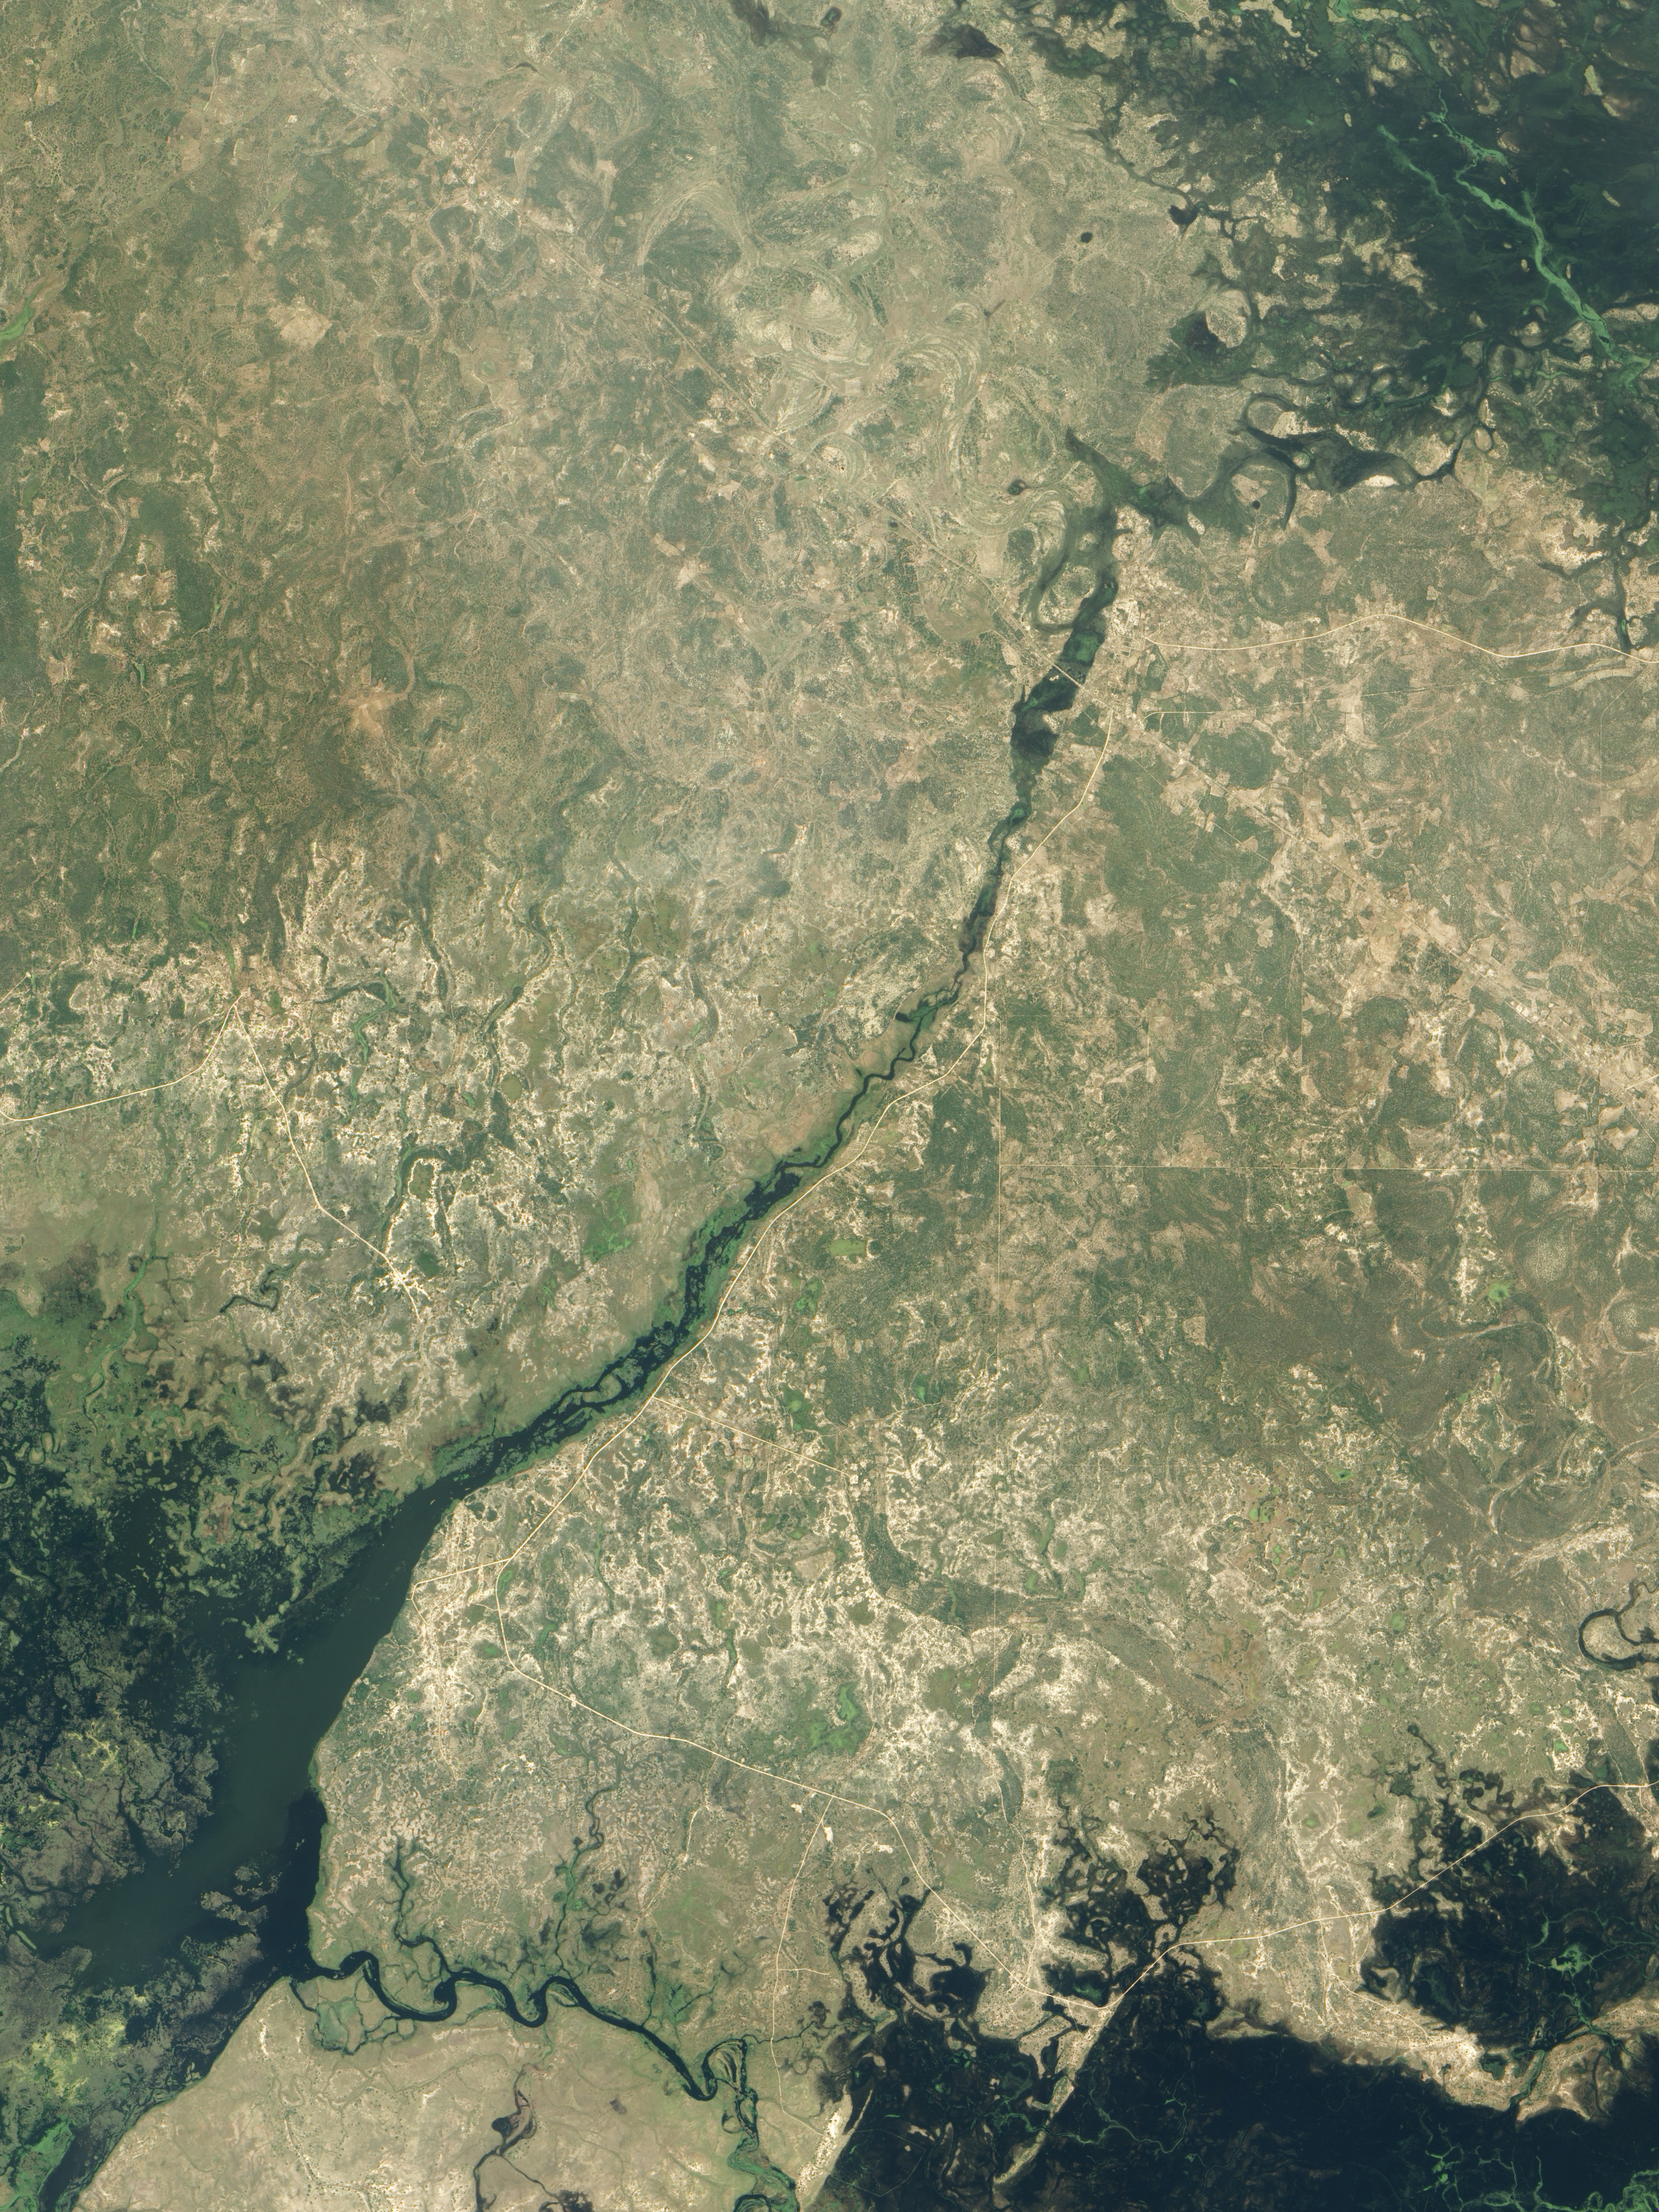 Bukalo Channel and Lake Liambezi - related image preview